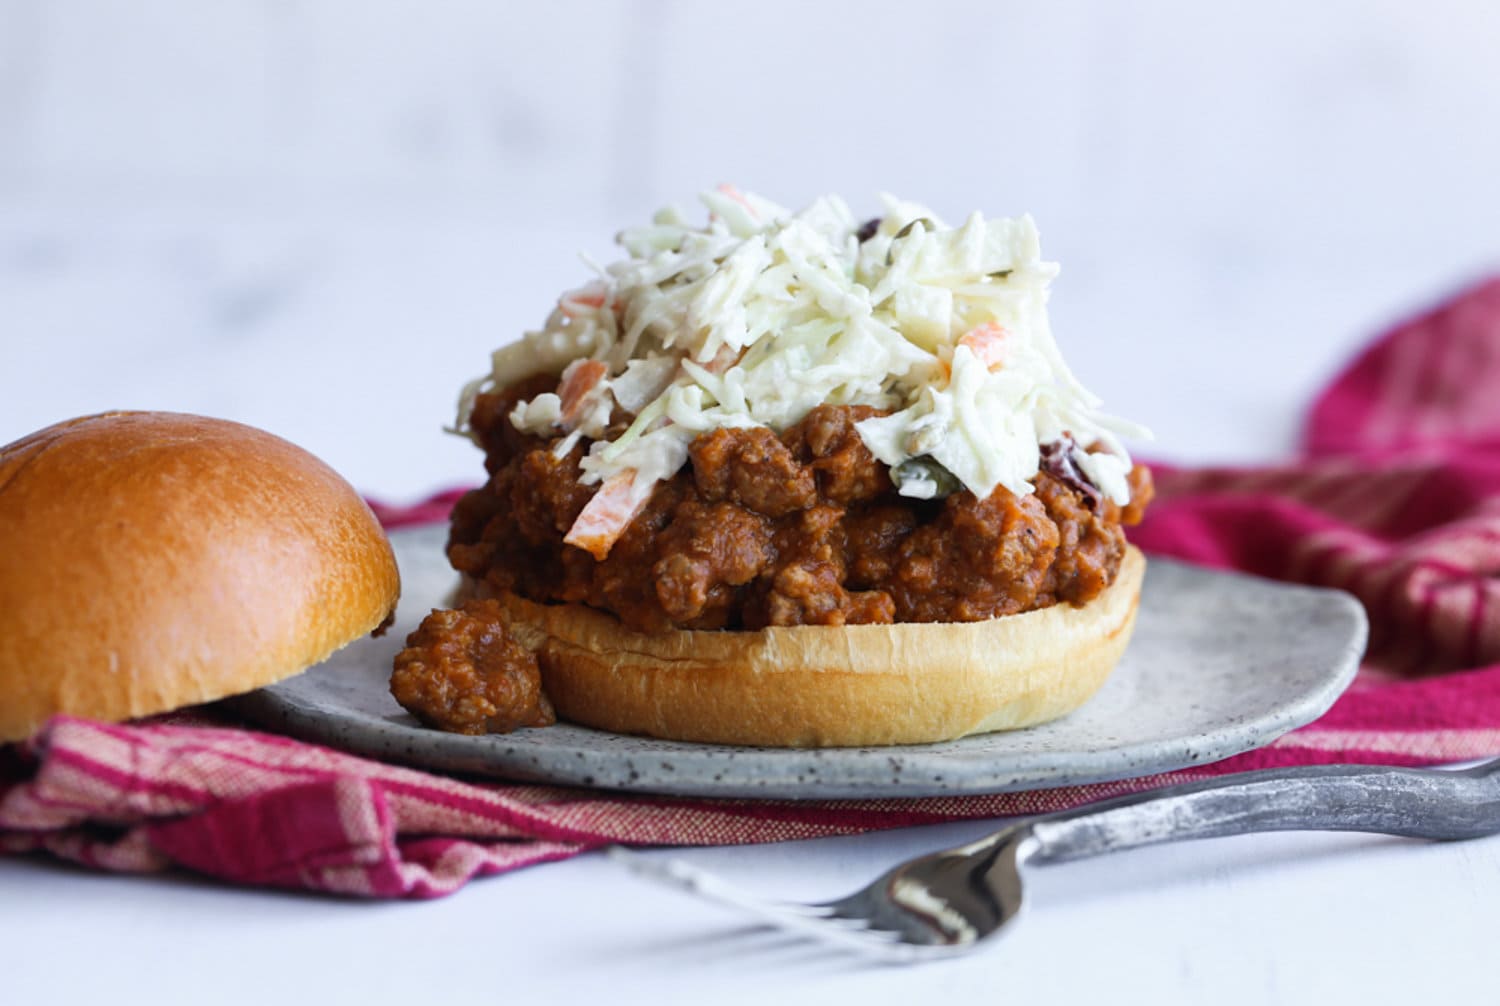 Topping a skoppy joe with cole slaw on a plate